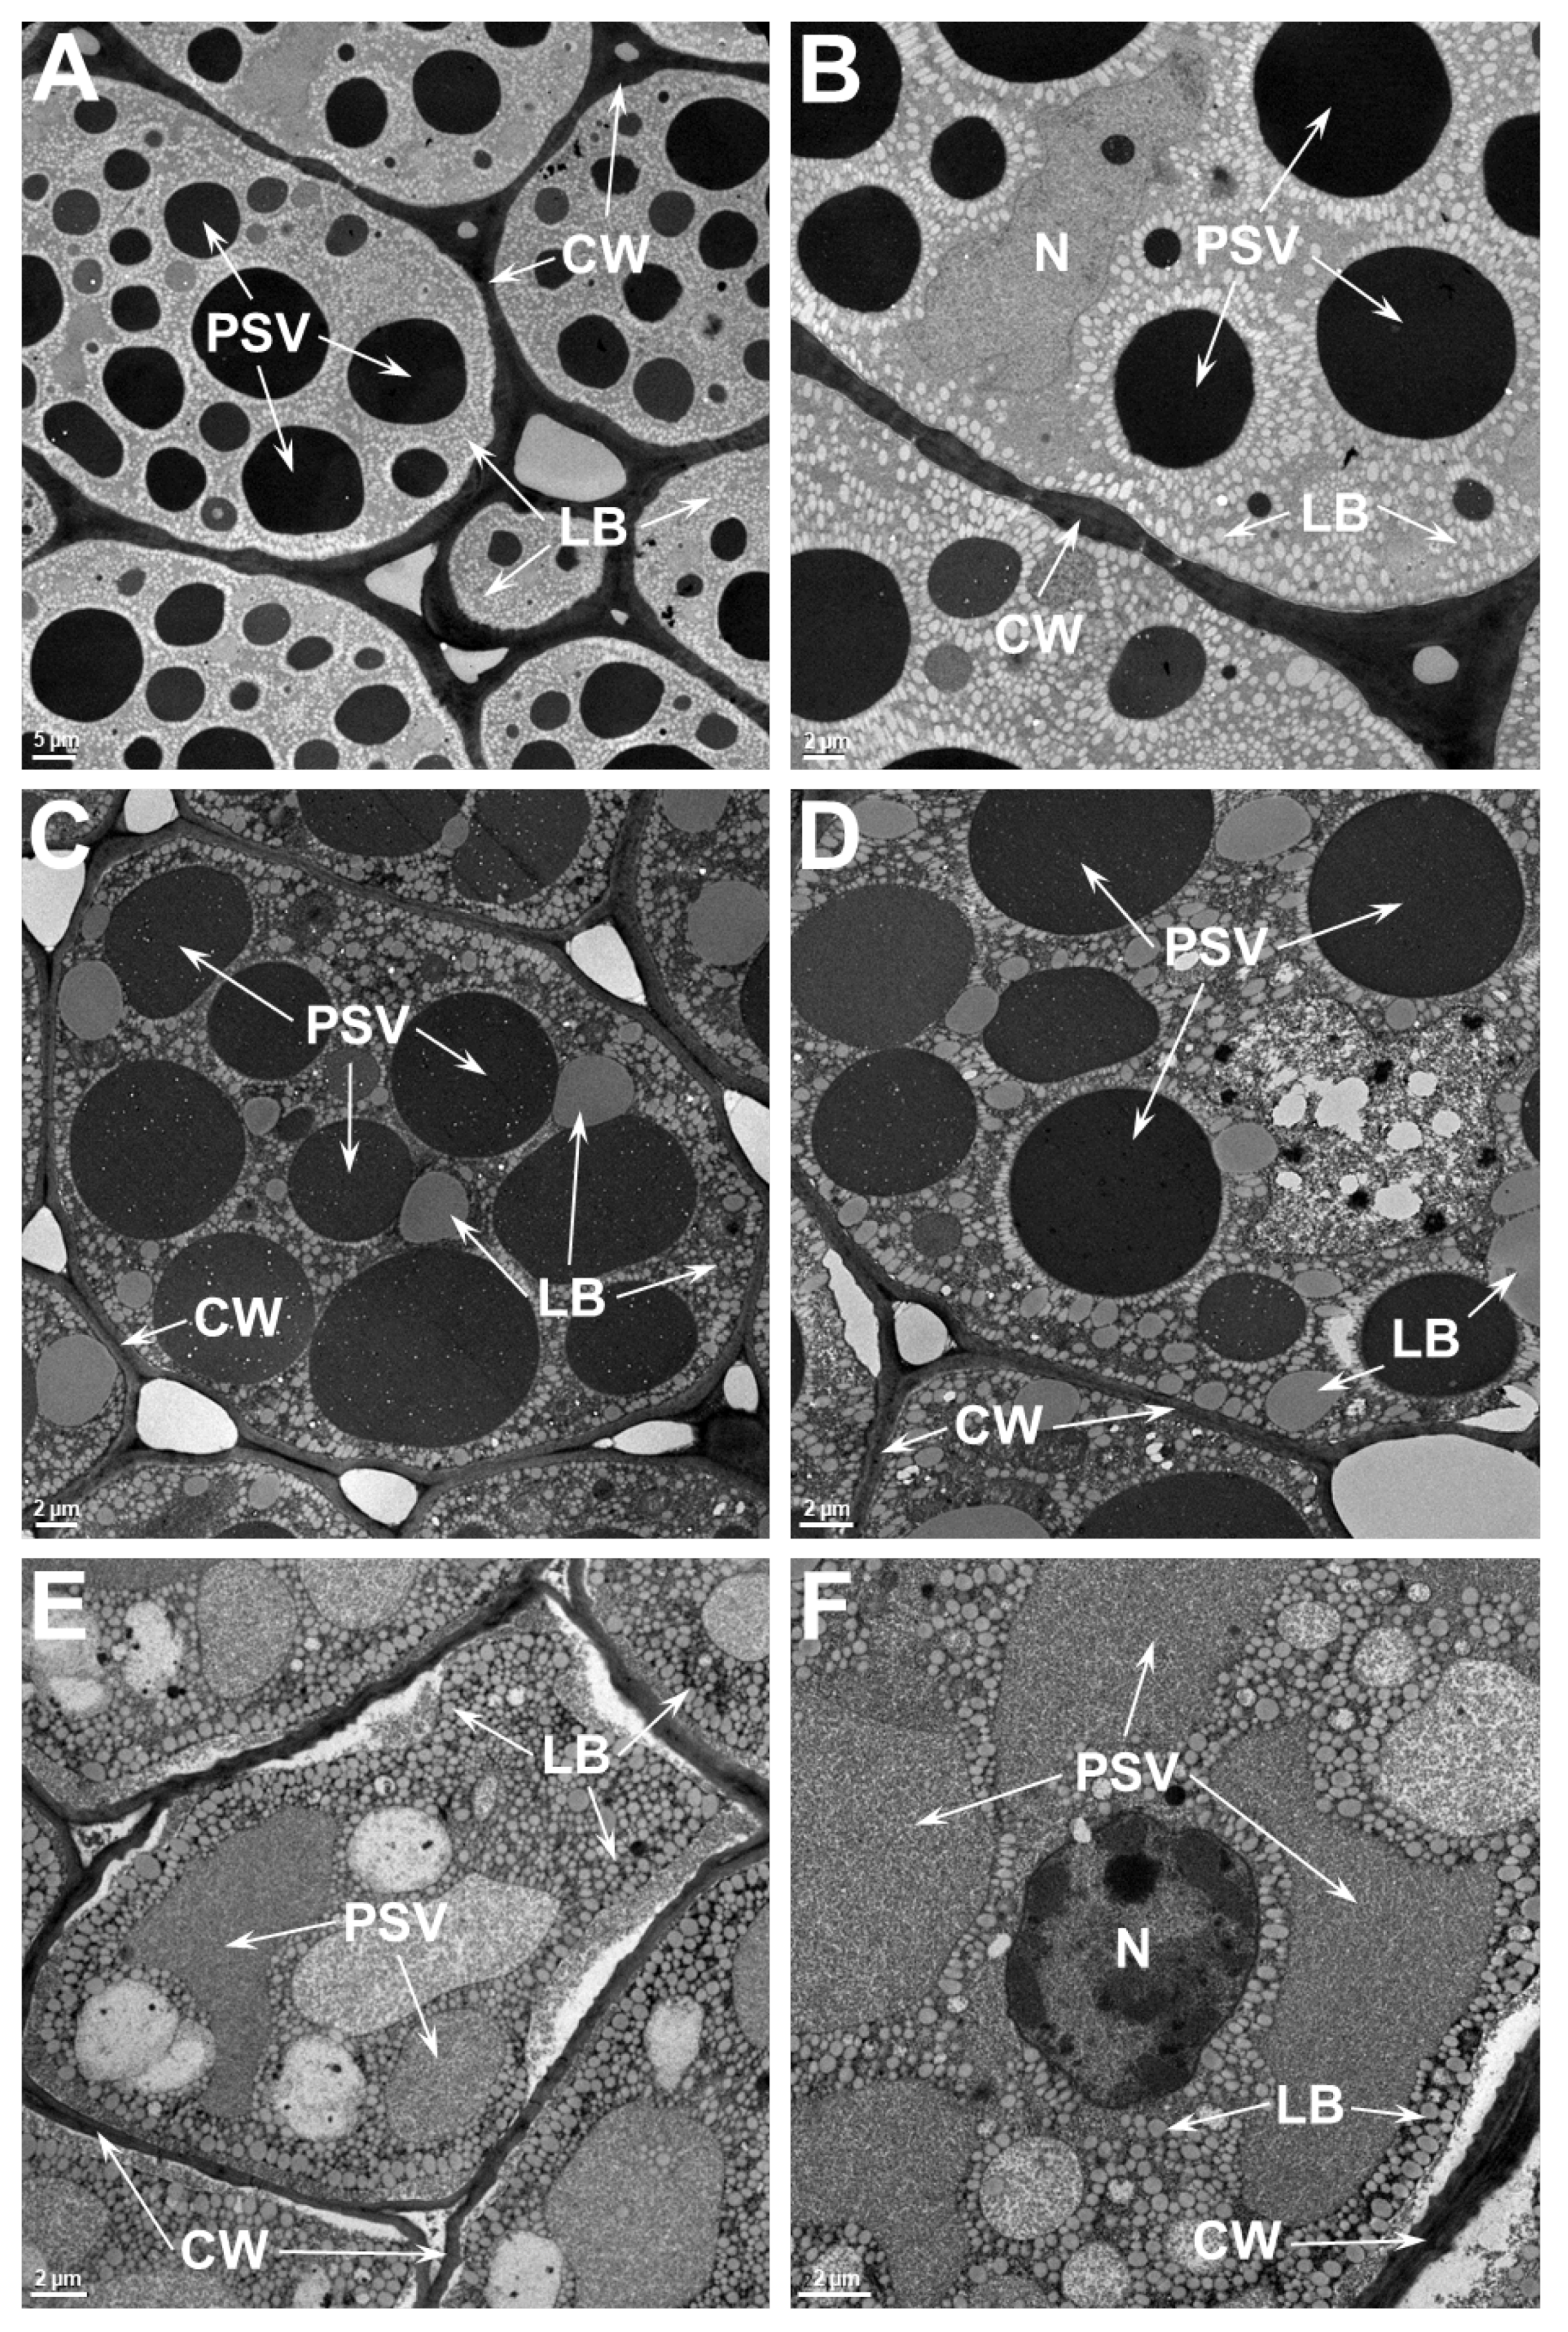 Ijms Free Full Text Effect Of Heat Stress On Seed Protein Composition And Ultrastructure Of Protein Storage Vacuoles In The Cotyledonary Parenchyma Cells Of Soybean Genotypes That Are Either Tolerant Or